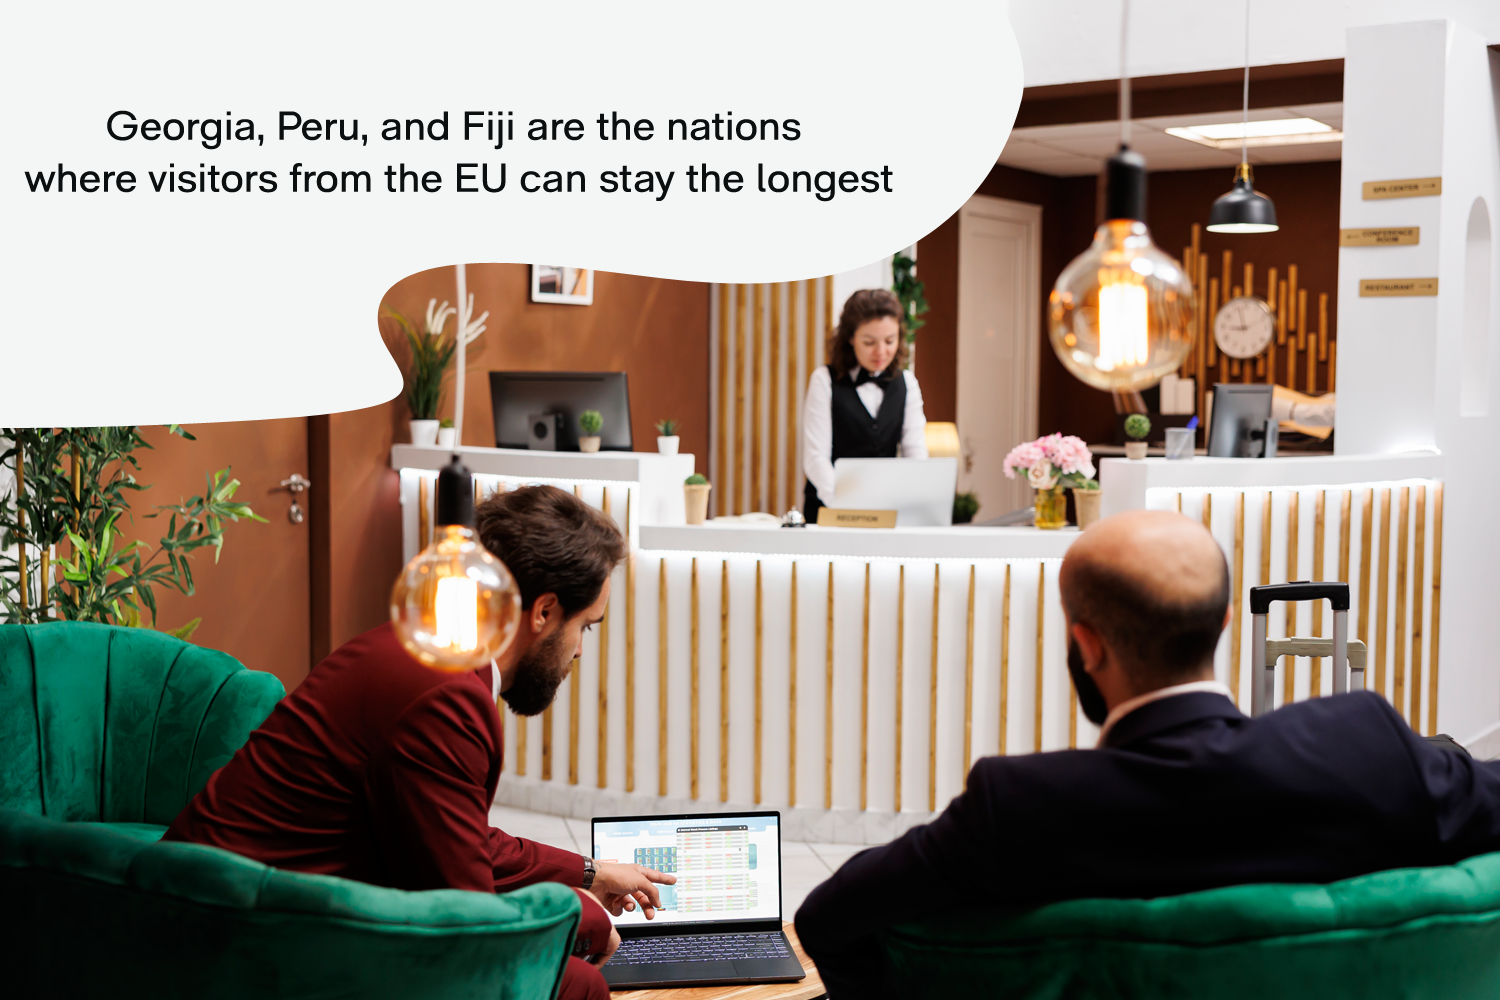 Georgia, Peru, and Fiji are the nations where visitors from the EU can stay the longest